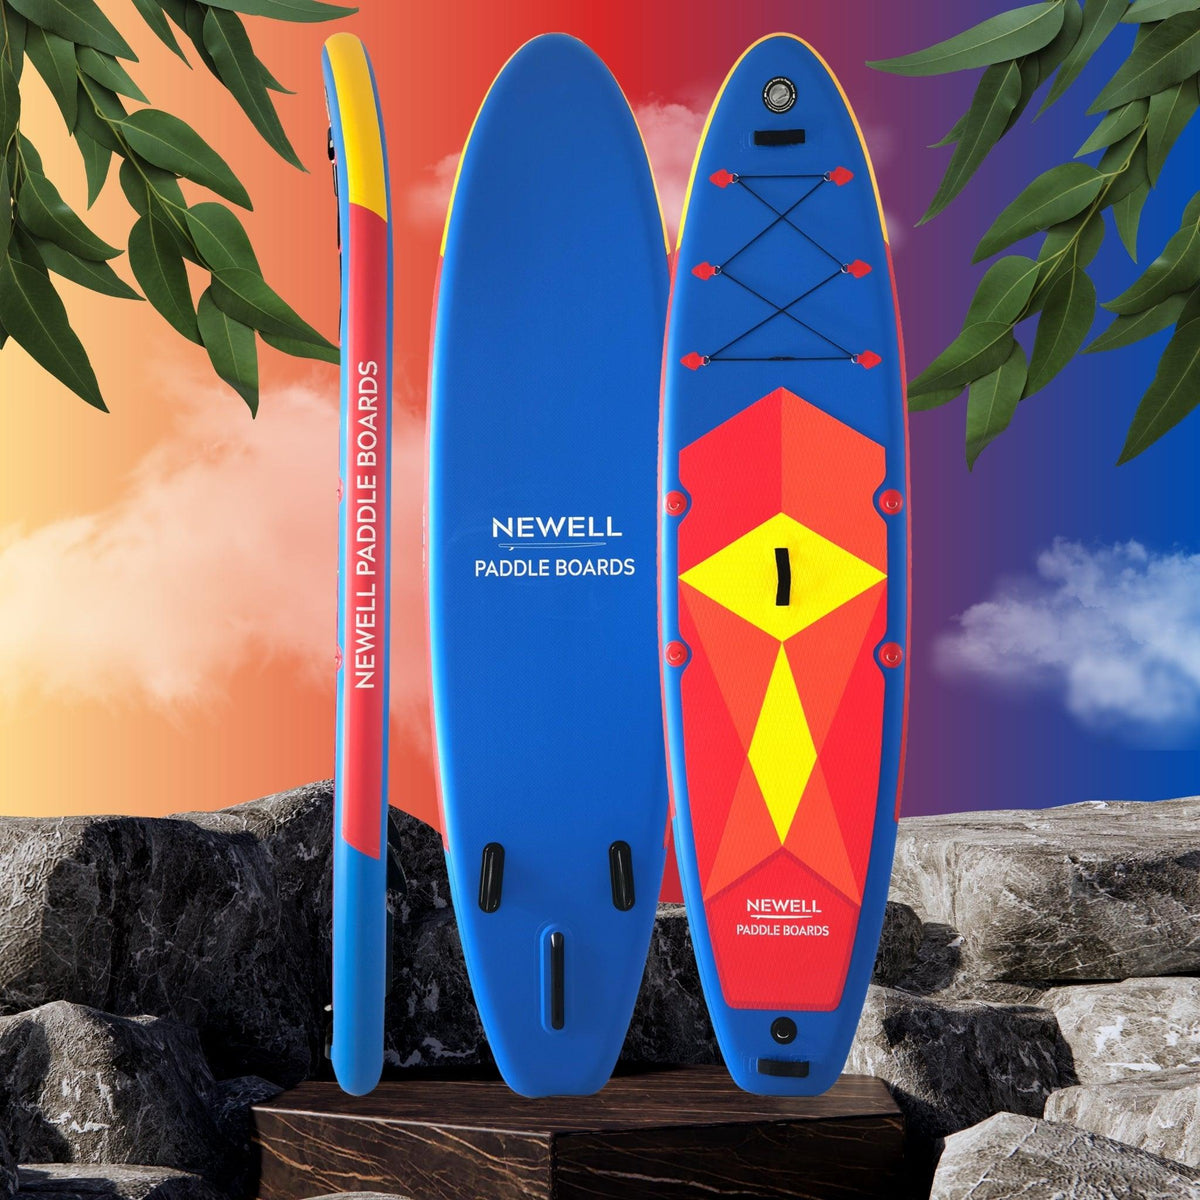 The Retro Rider paddleboard against a colorful background.